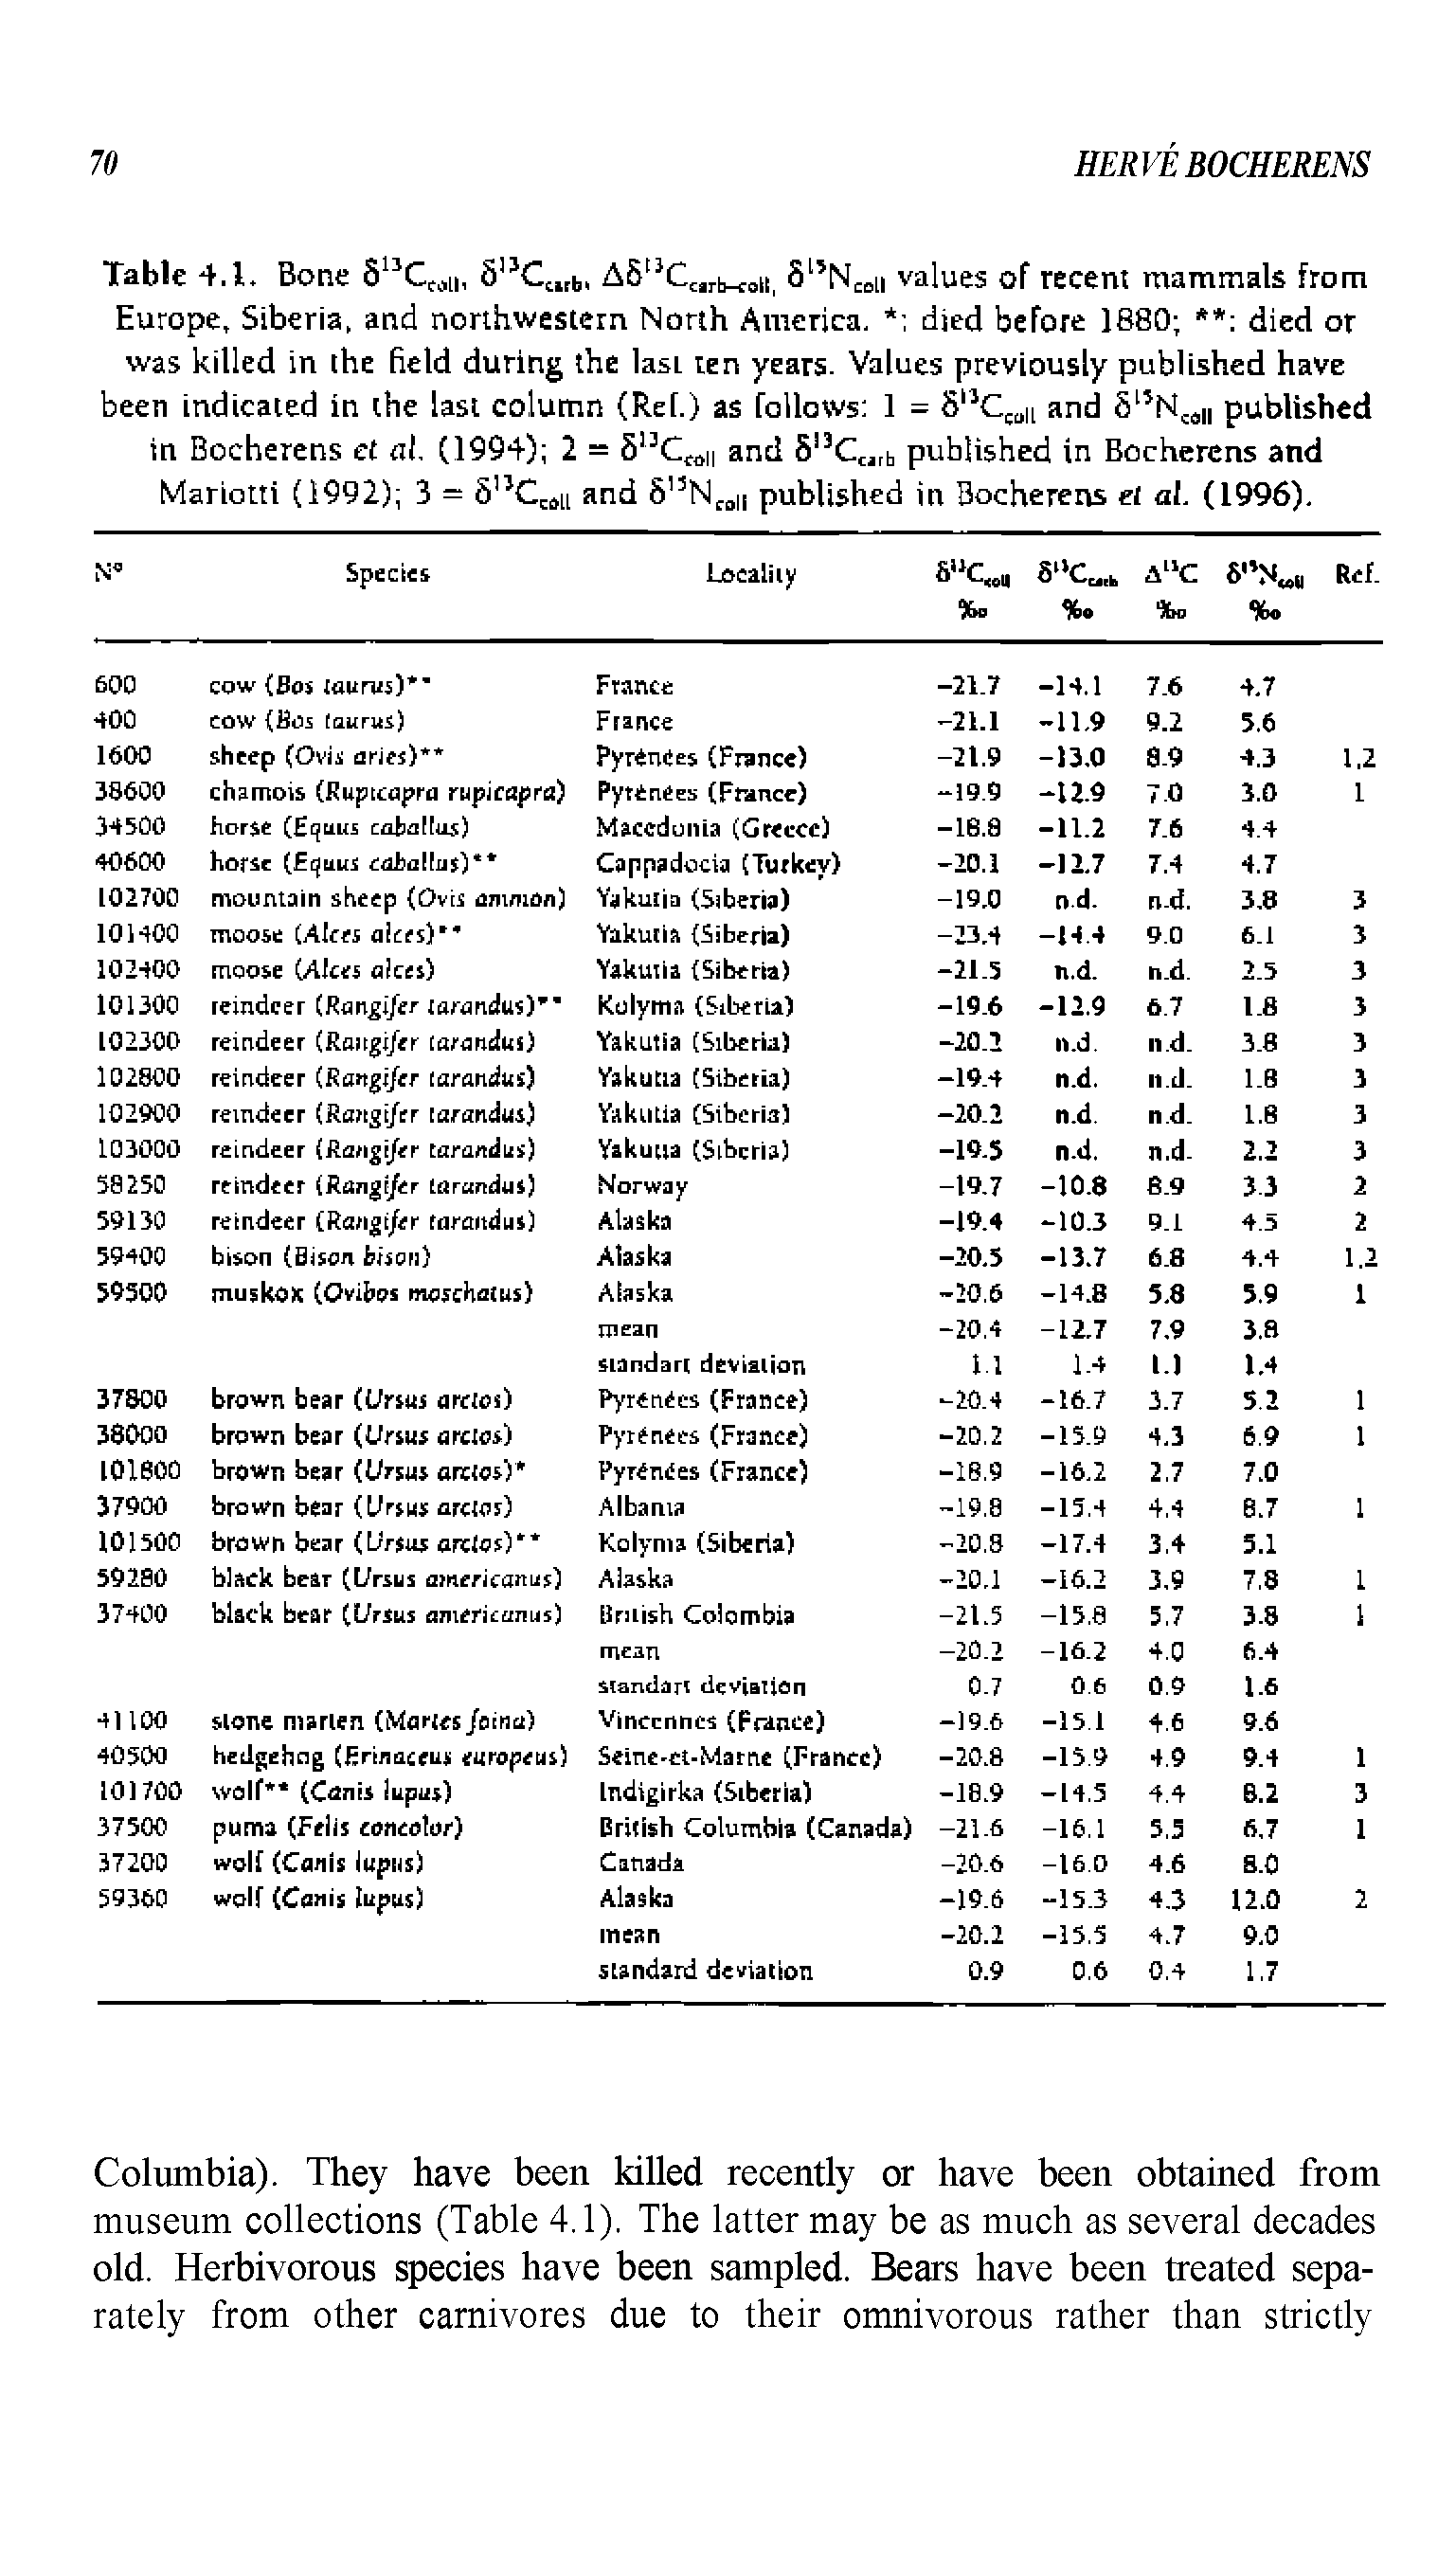 Table 4.1. Bone 5 C n, 5 C ,b, AS C rb-coii, S N ii values of recent mammals from Europe, Siberia, and northwestern North America. died before 1880 died or was killed in the field during the last ten years. Values previously published have been indicated in the last column (Ret.) as follows 1 = and 5 N an published...